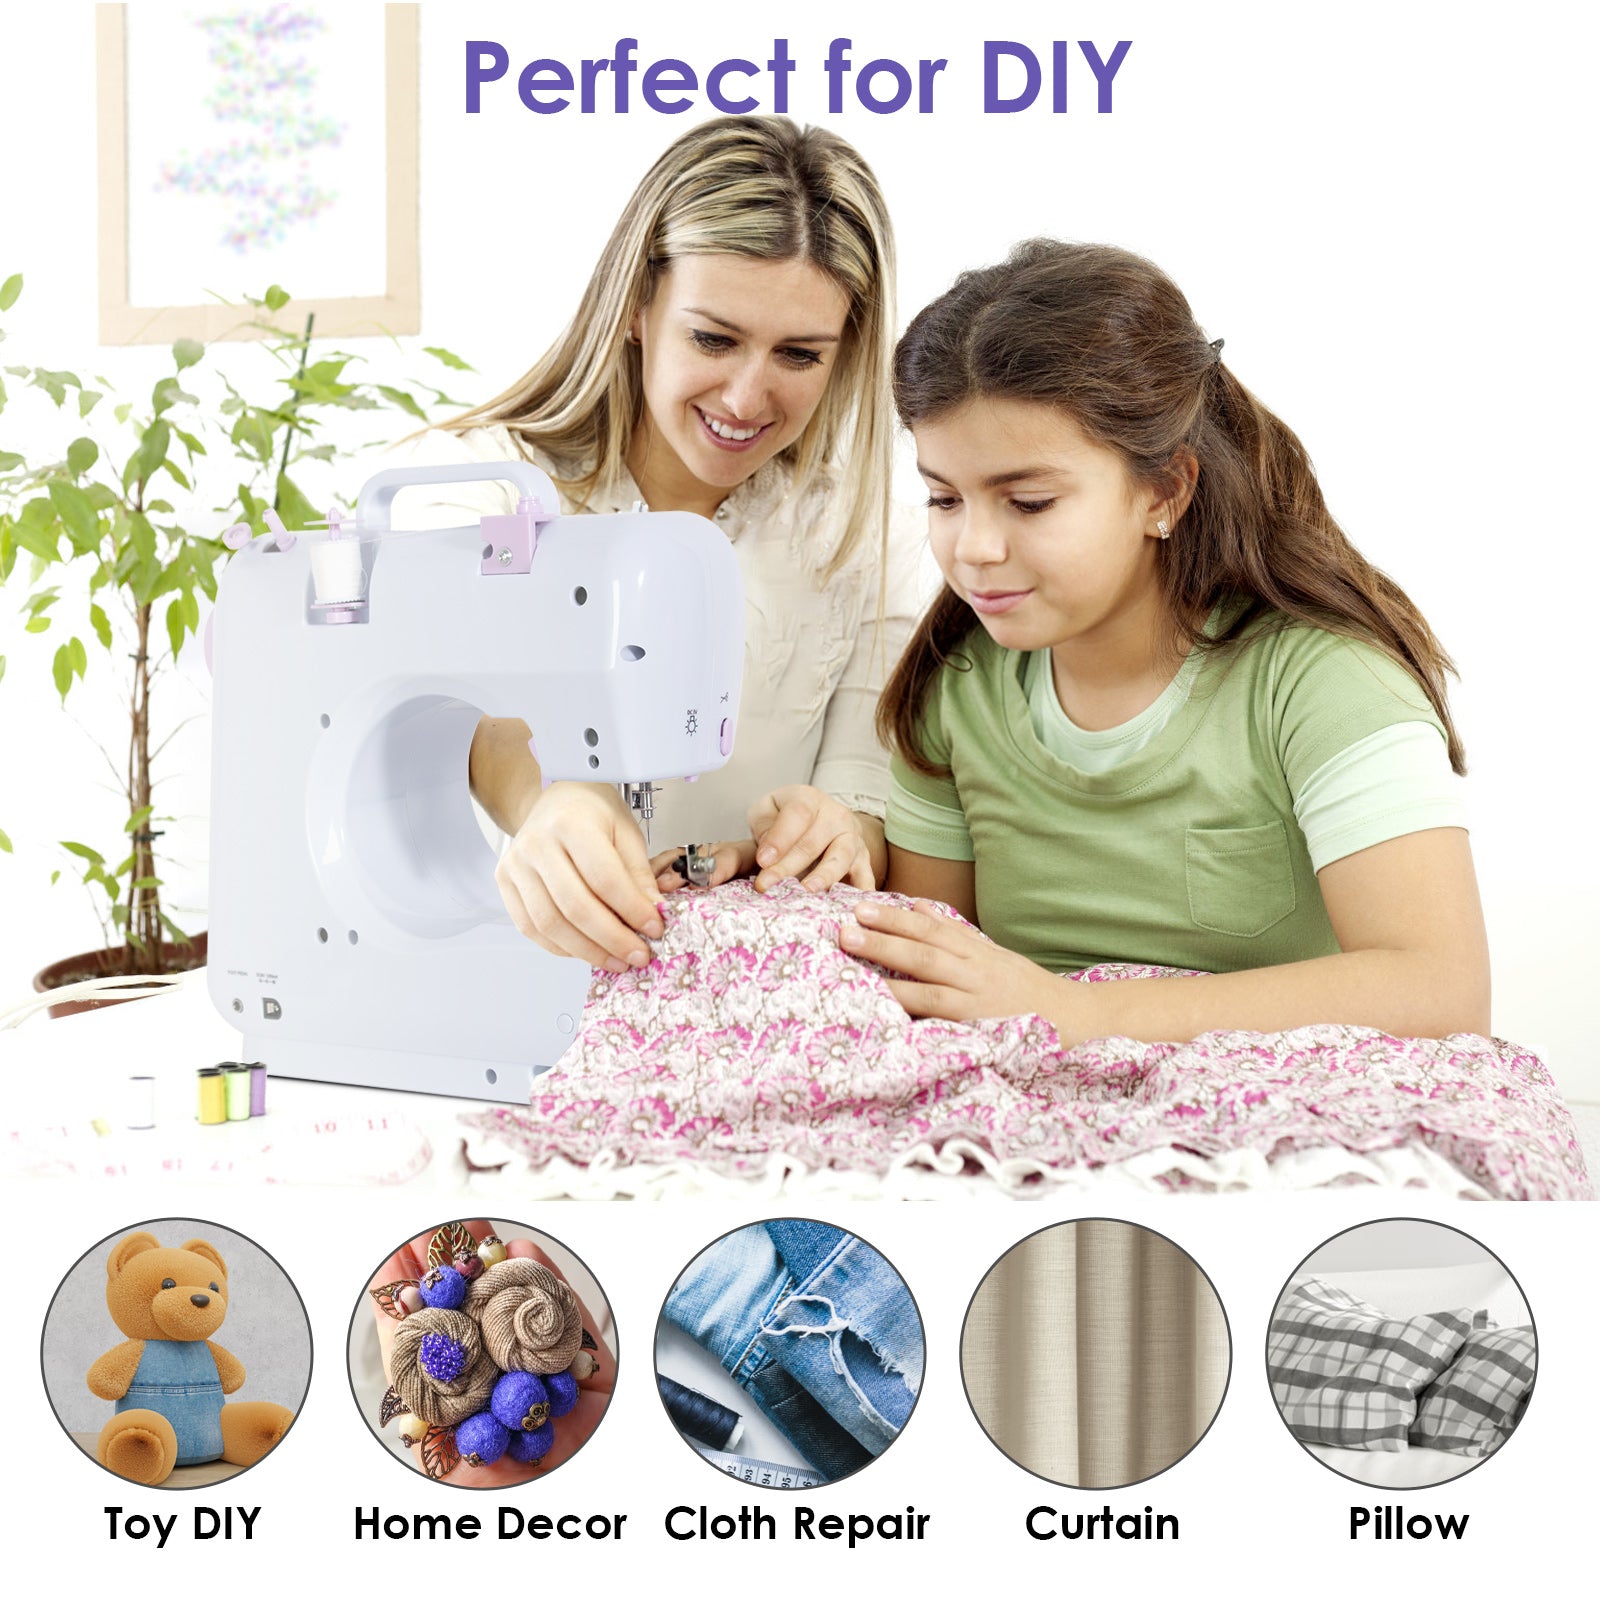 Todeco-Electric-Sewing-Machine-Beginner-Sewing-Machine-with-12-Sewing-Programs-with-Sewing-Kit-and-Pedals-for-Beginners-Parents-and-Children-Purple-Electric-Sewing-Machine-Purple